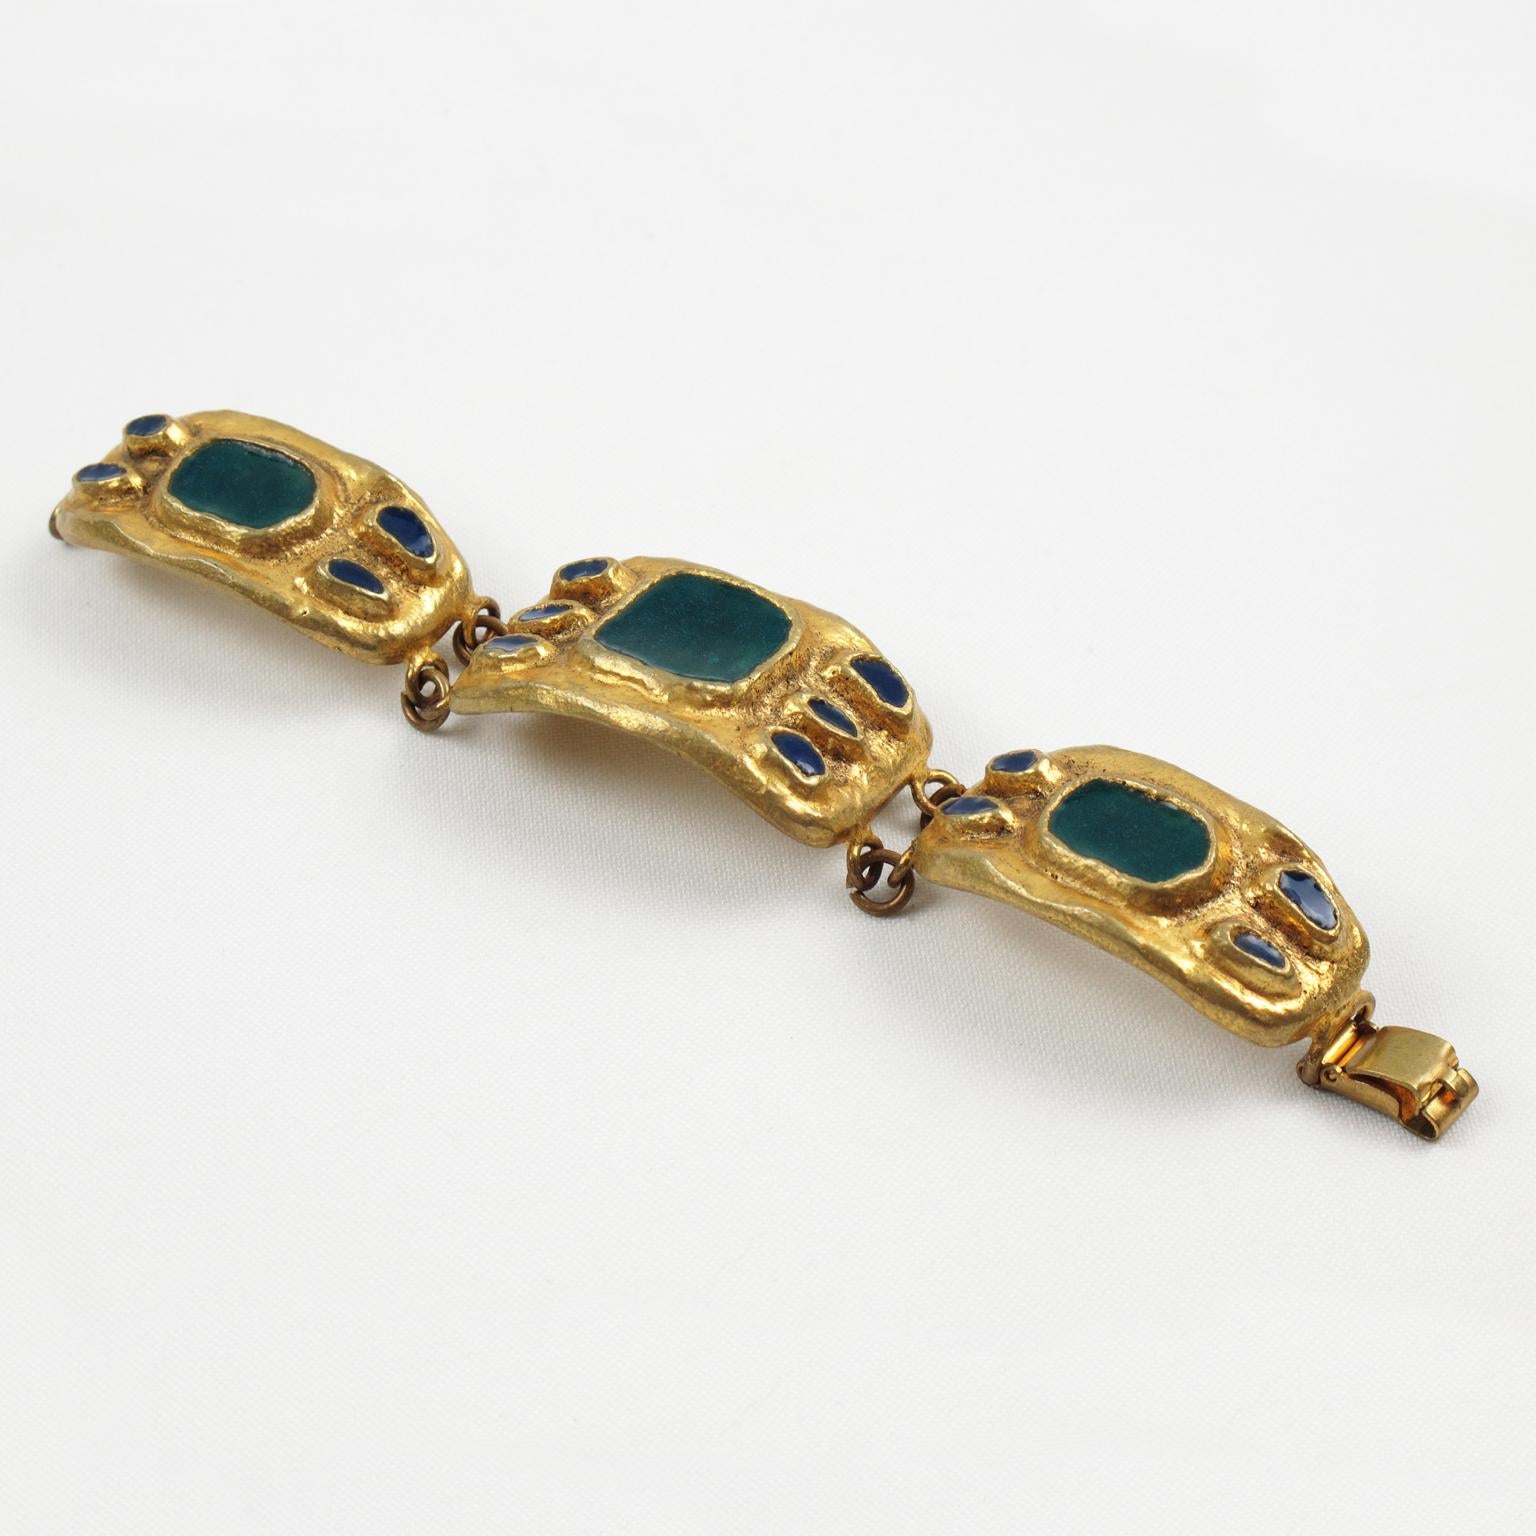 Elegant Mid-Century 1950s link bracelet created by French designer and artist Willy. The bracelet features geometric gilt bronze hand-made shaped elements topped with thick enamel in turquoise-teal and navy blue colors. Locking clasp box to fasten